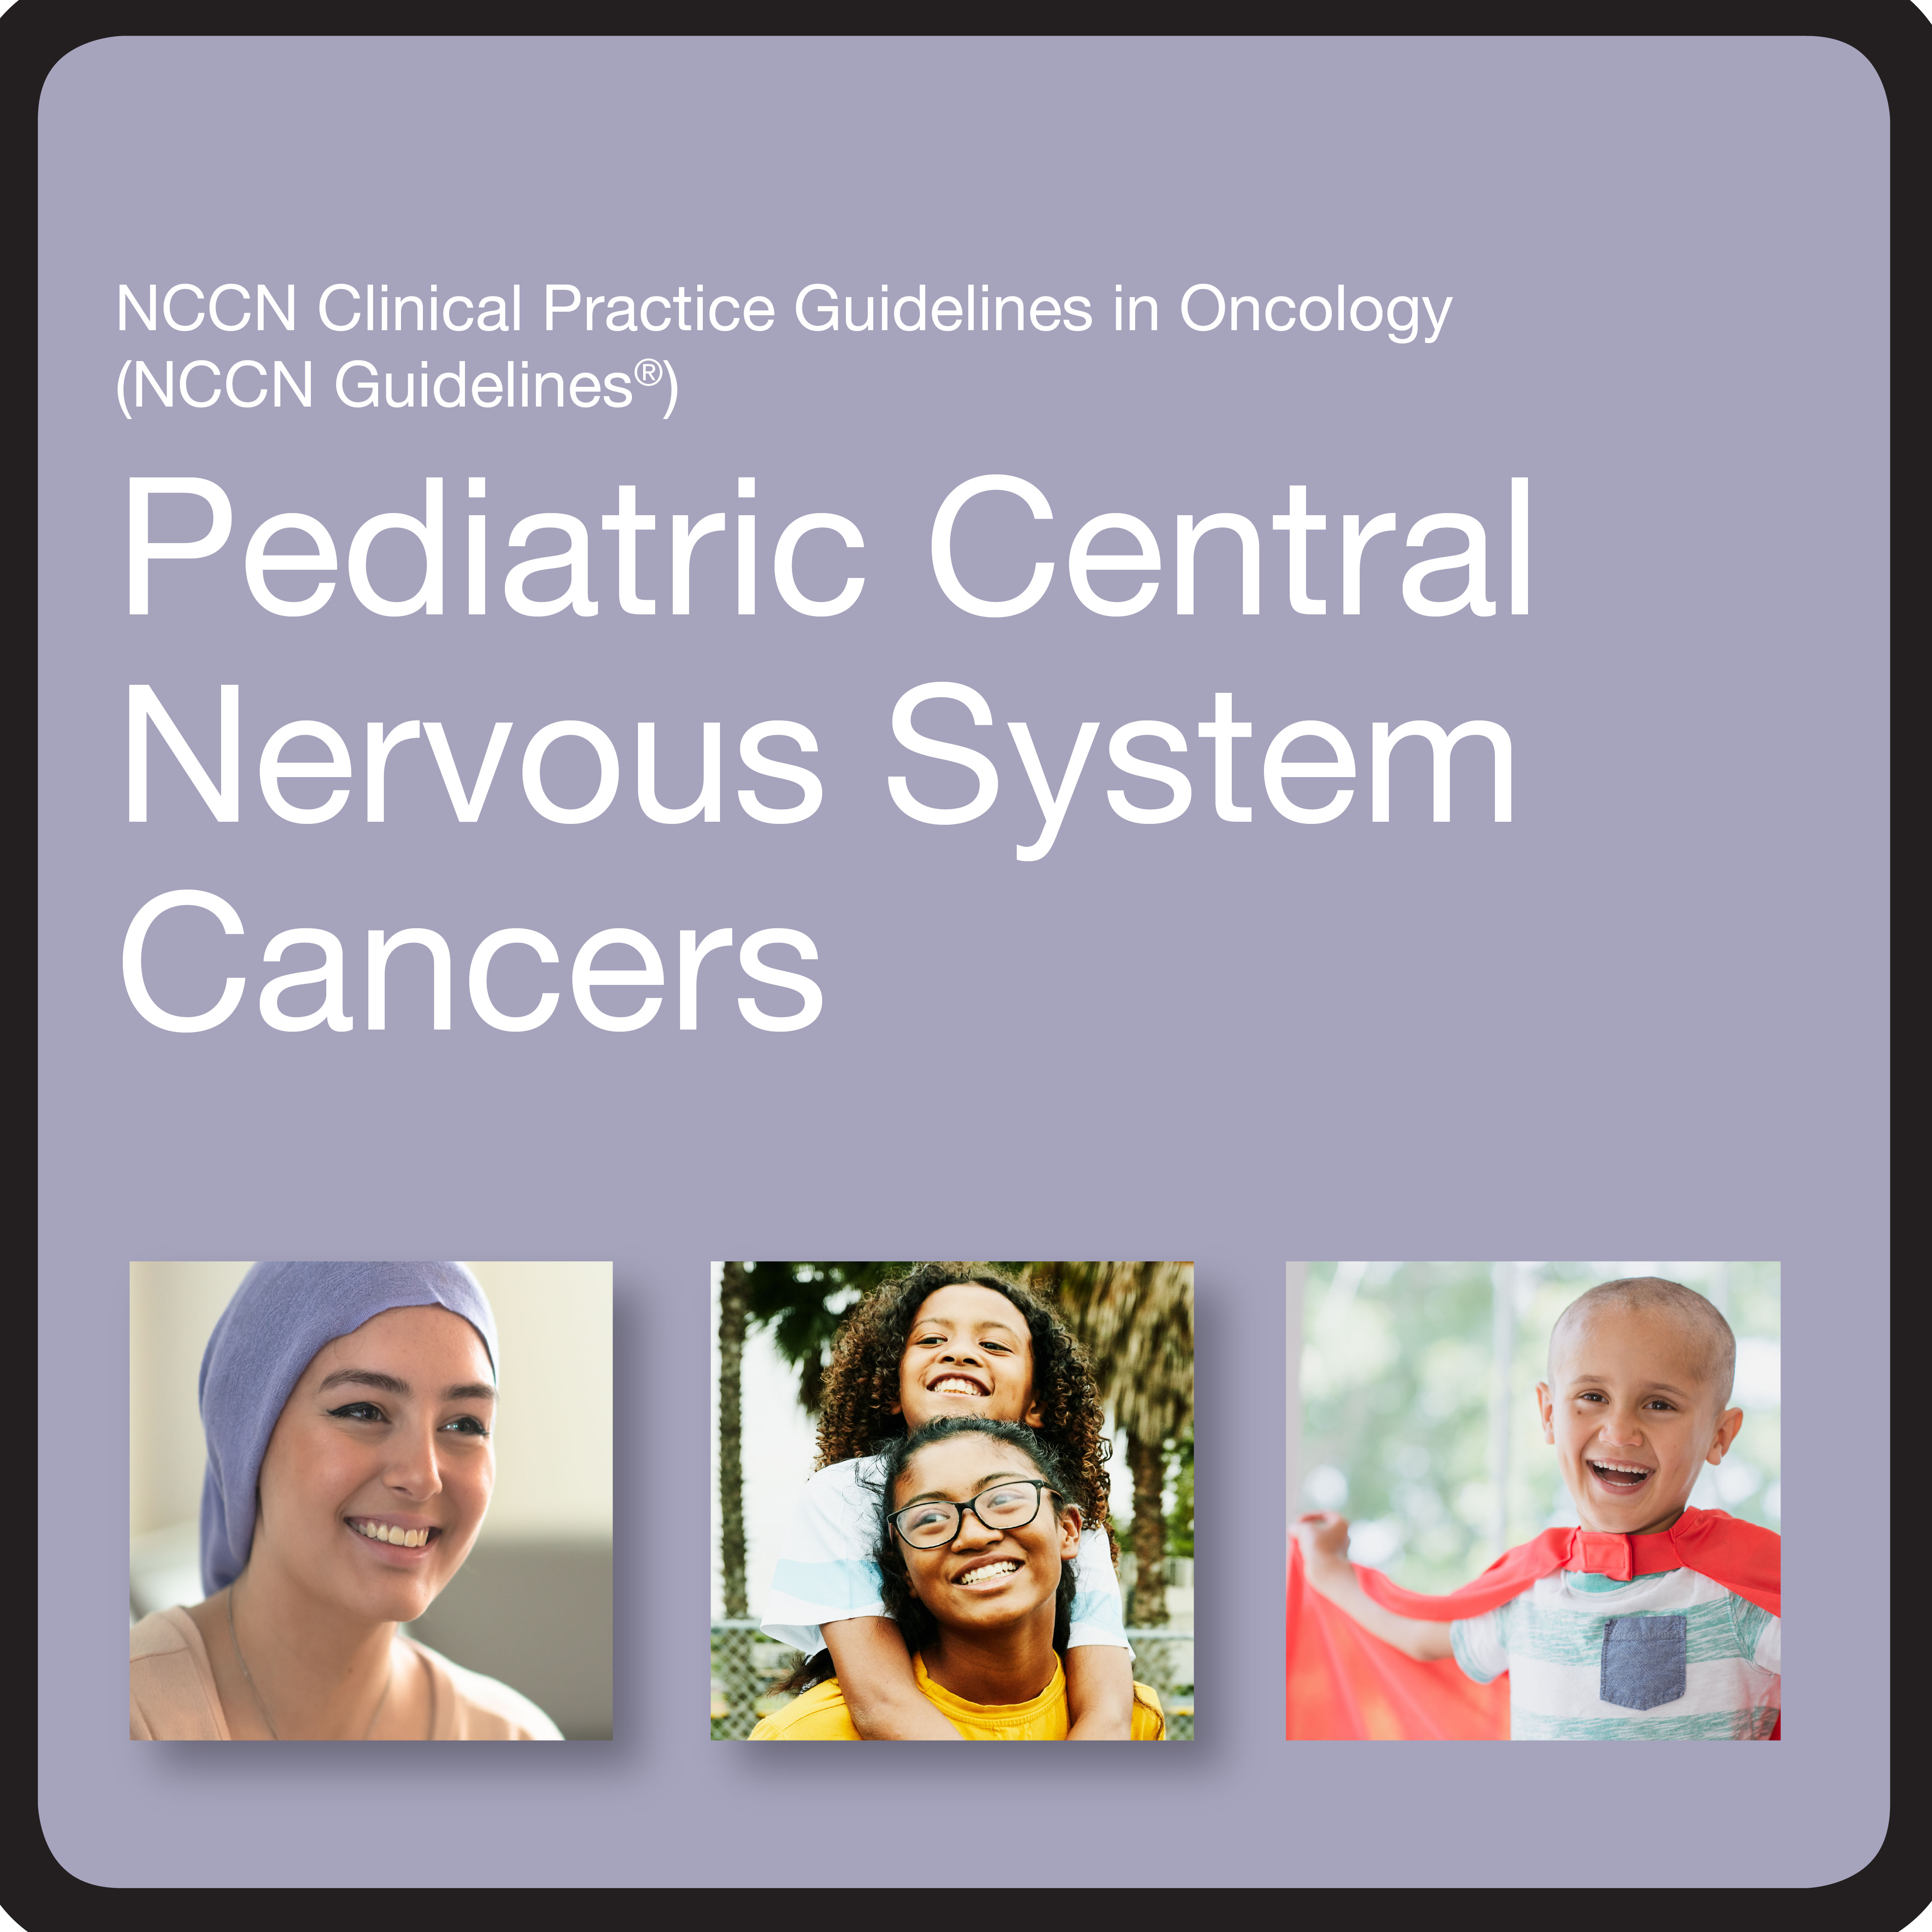 NCCN Guidelines for Pediatric CNS Cancers